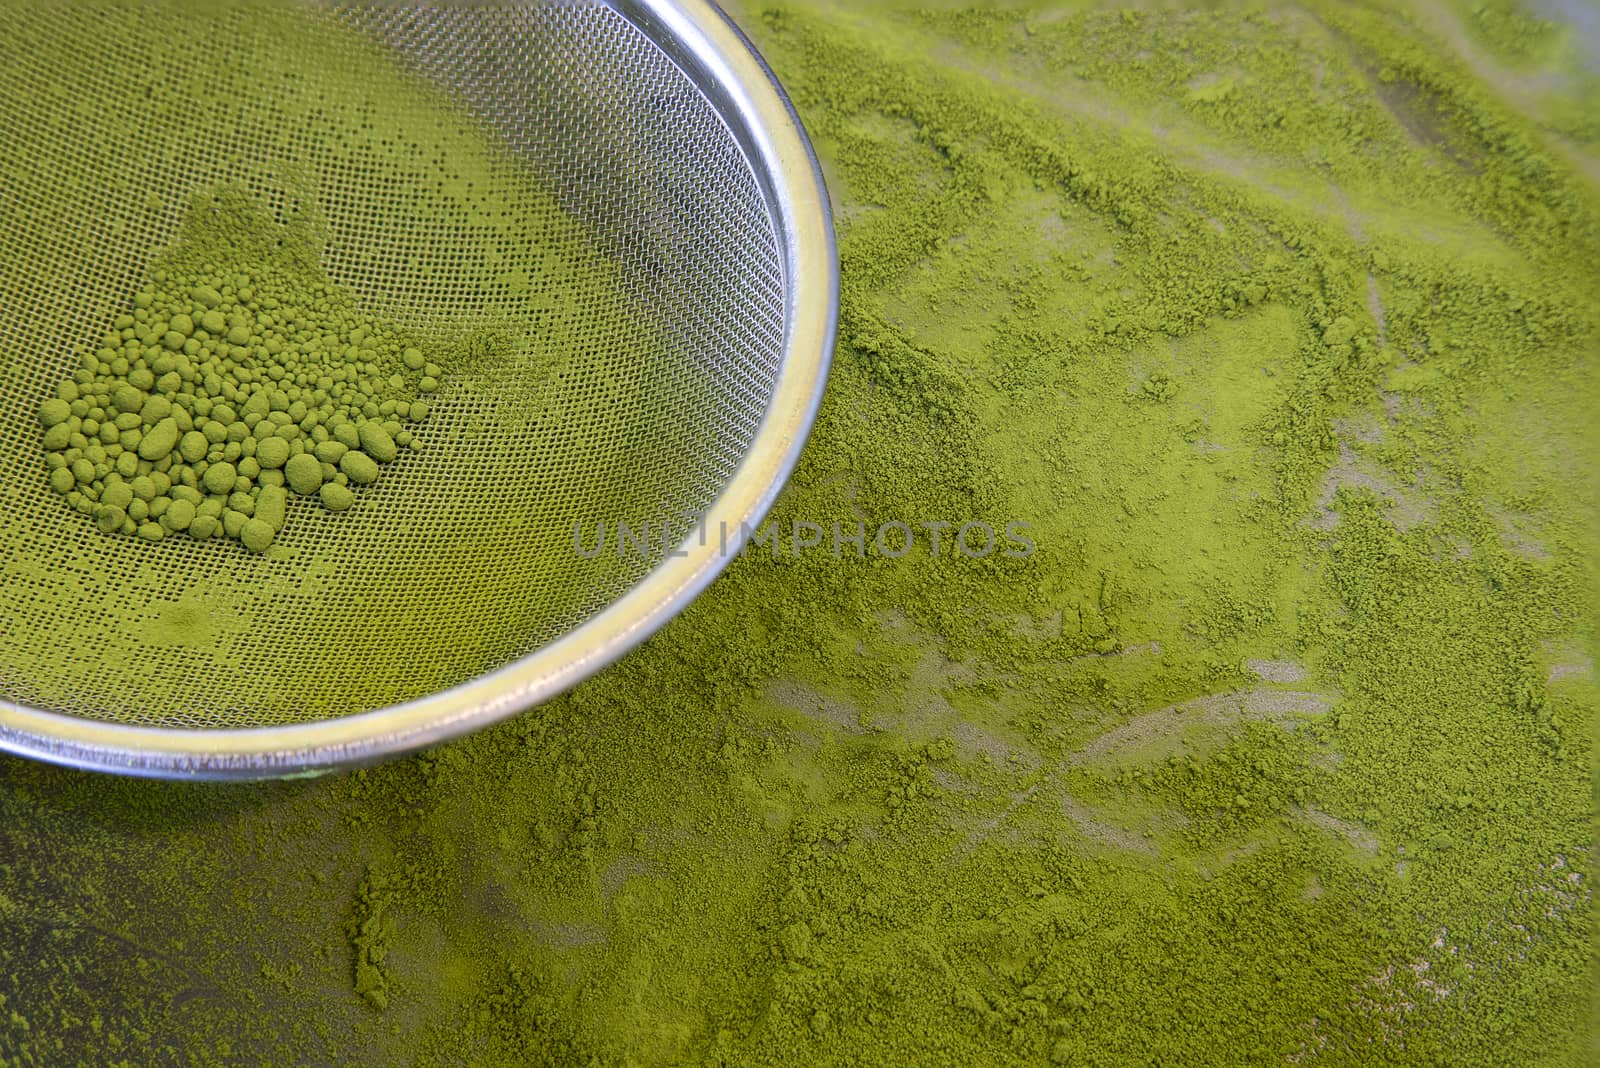 Making fine powered green tea. A tray filled with sieved fine green tea powder. Closeup, viewing above image.